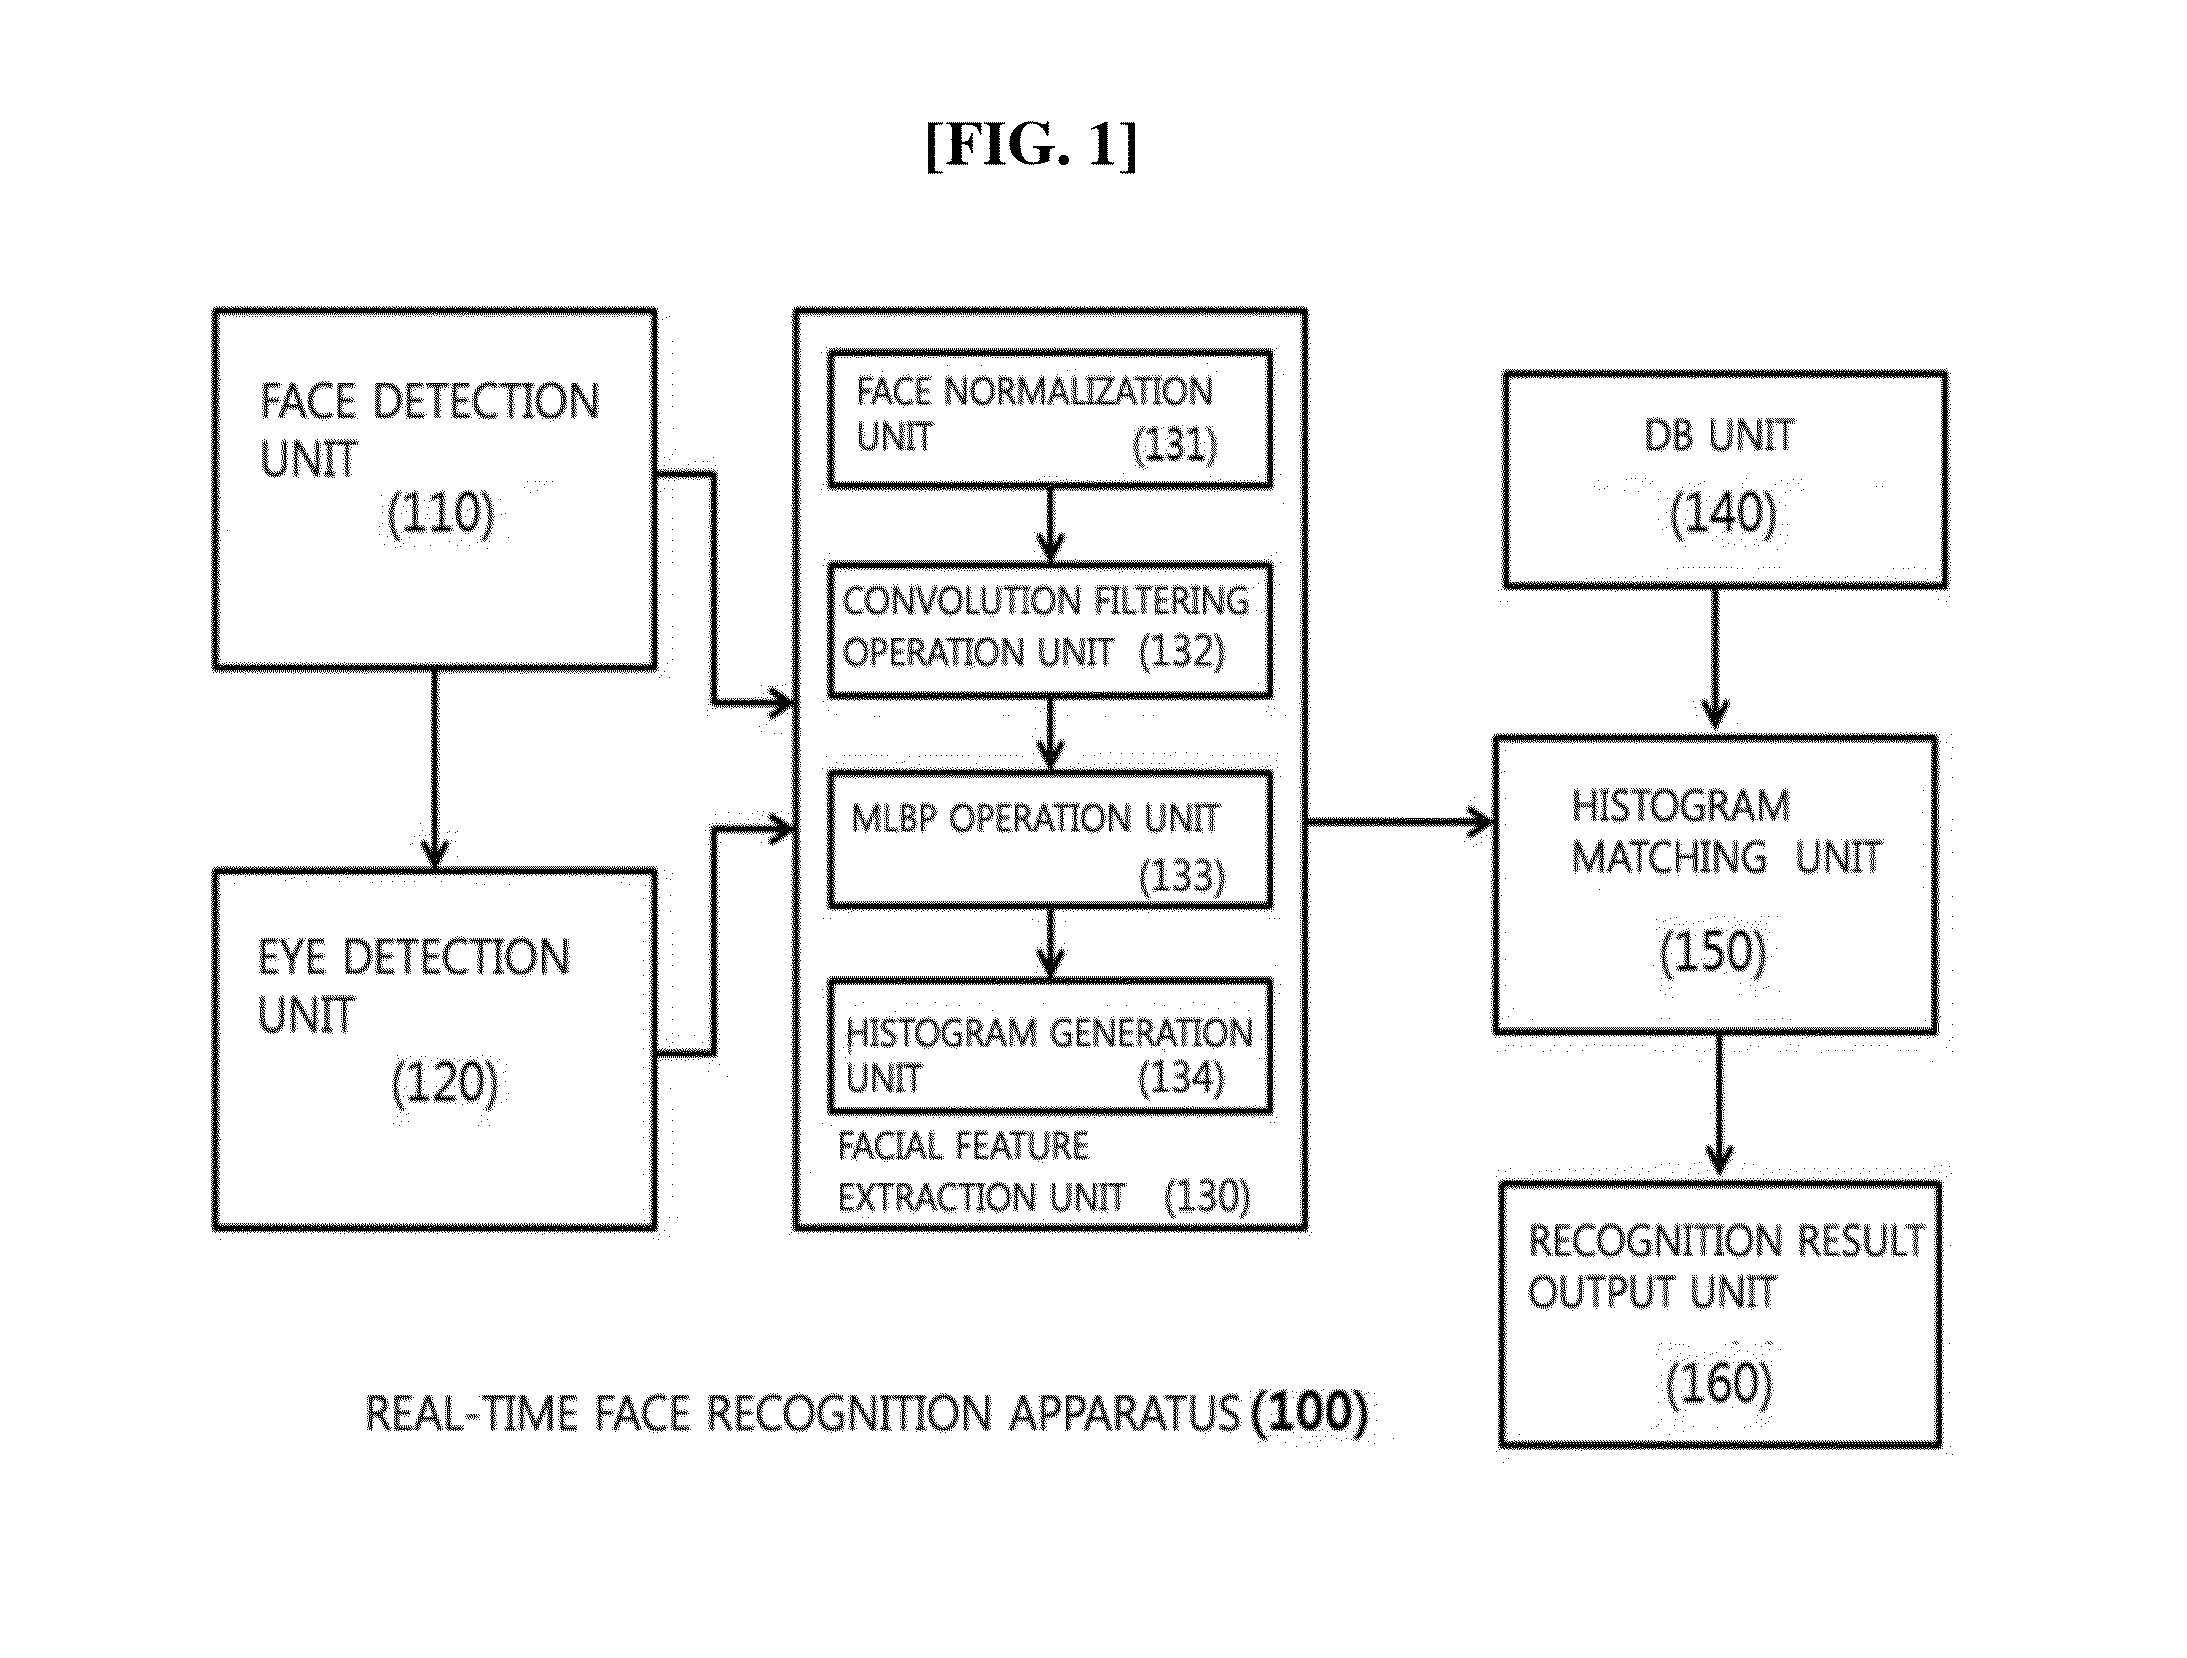 Apparatus for real-time face recognition